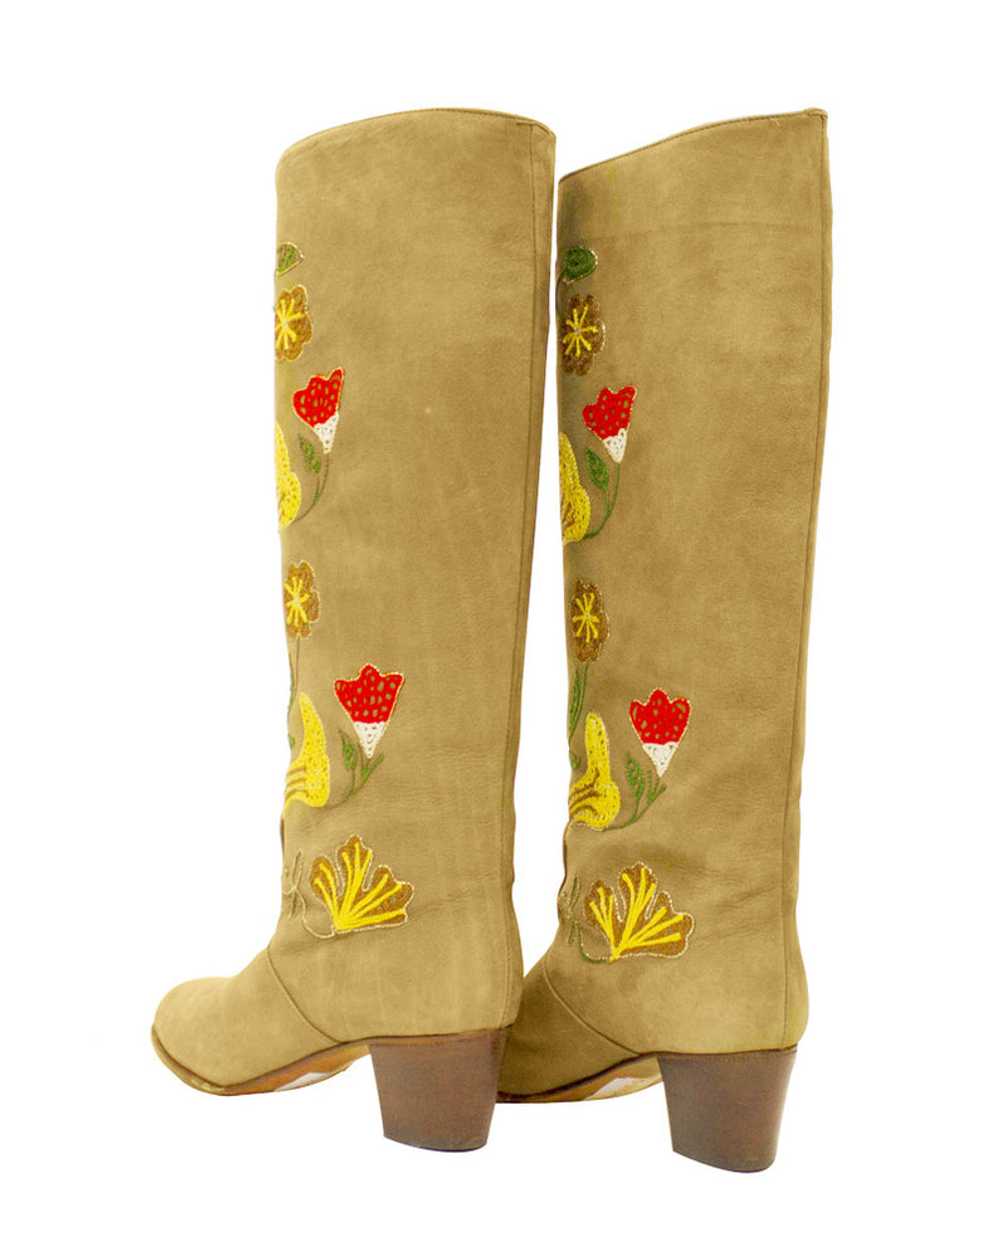 Tan Suede Floral Embroidery Boots - image 2